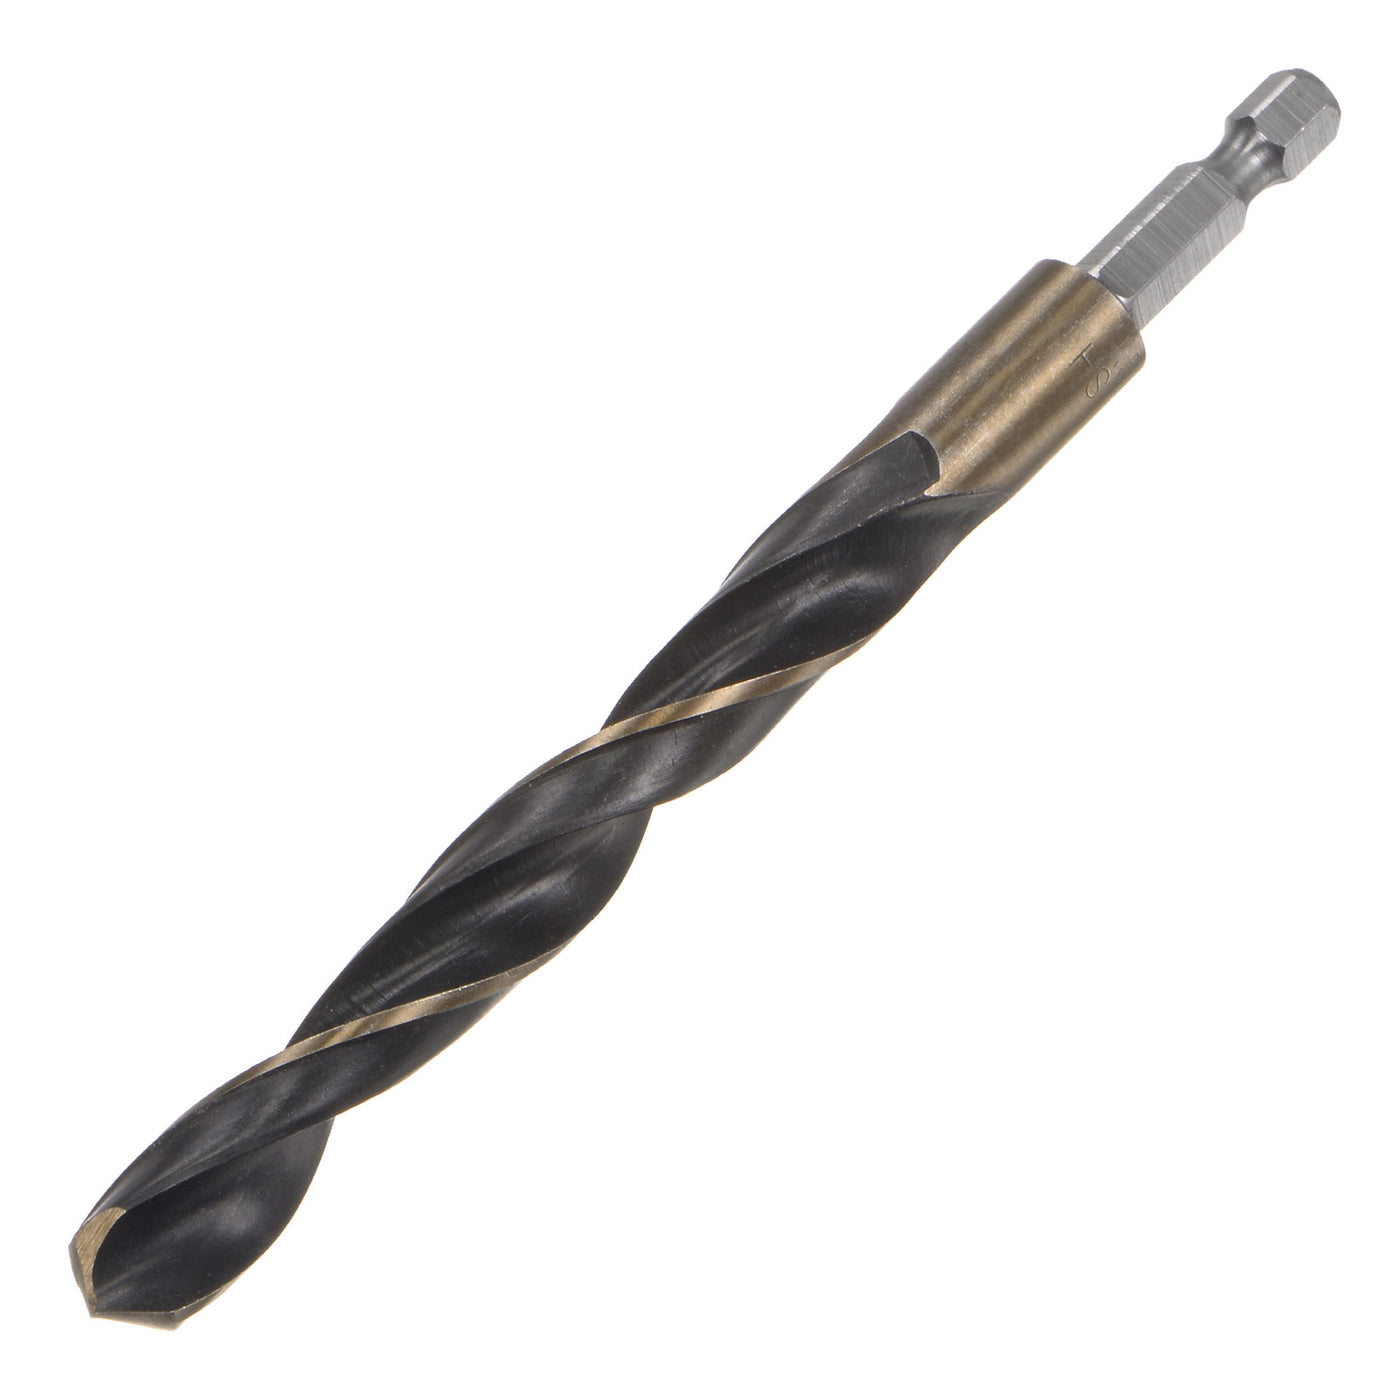 uxcell Uxcell 11.5mm High Speed Steel Twist Drill Bit with Hex Shank 140mm Length